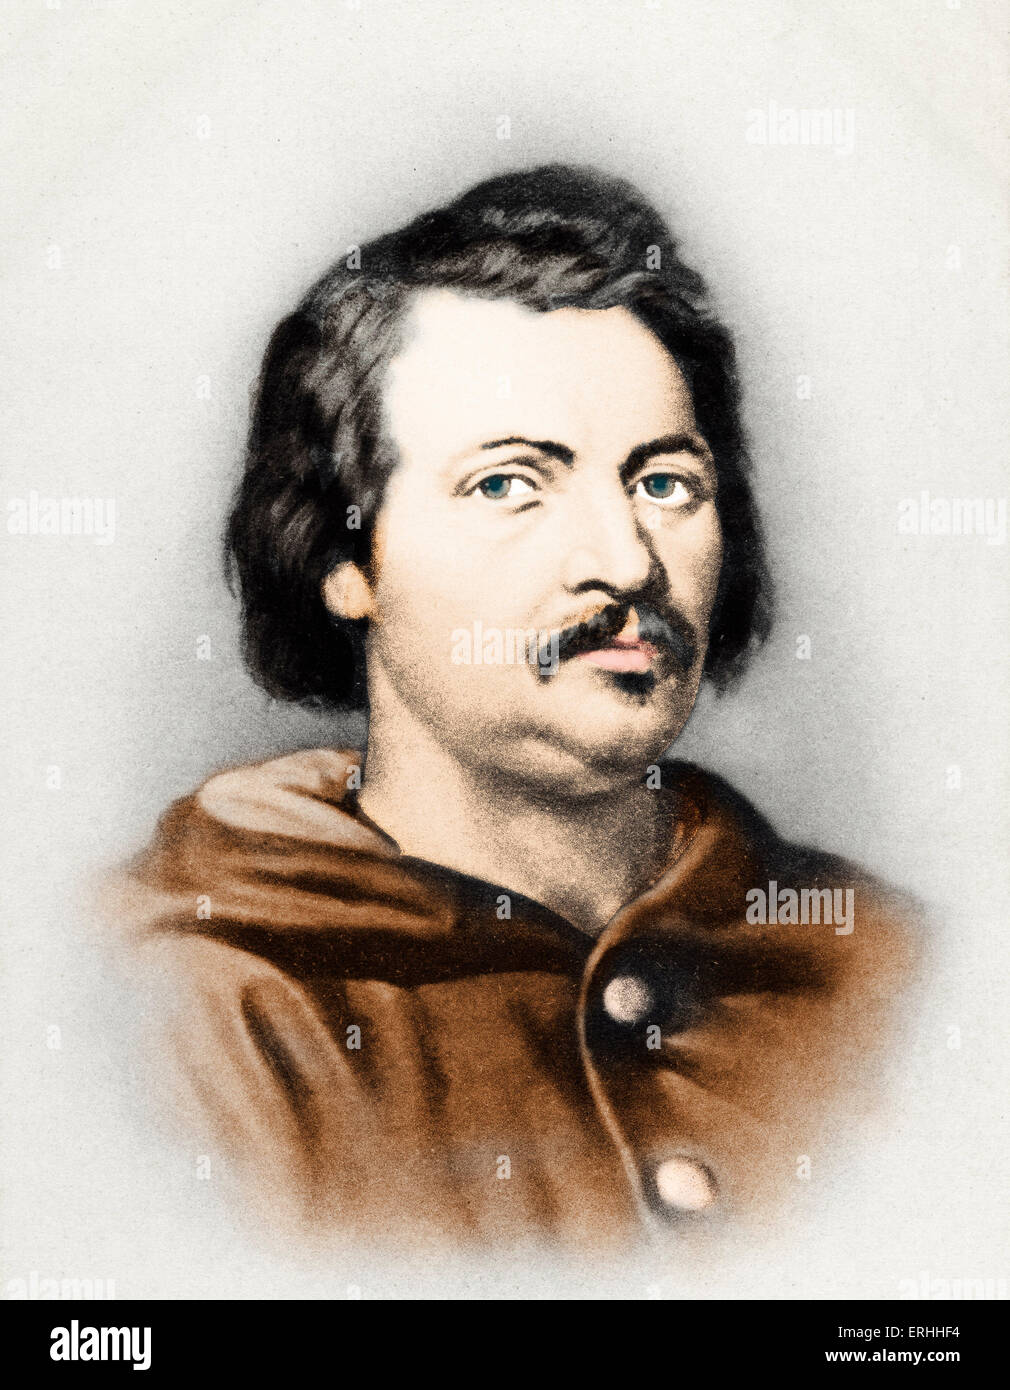 Honoré de Balzac, portrait. rench novelist and playwright. 20 May 1799 - 18 August 1850. Stock Photo